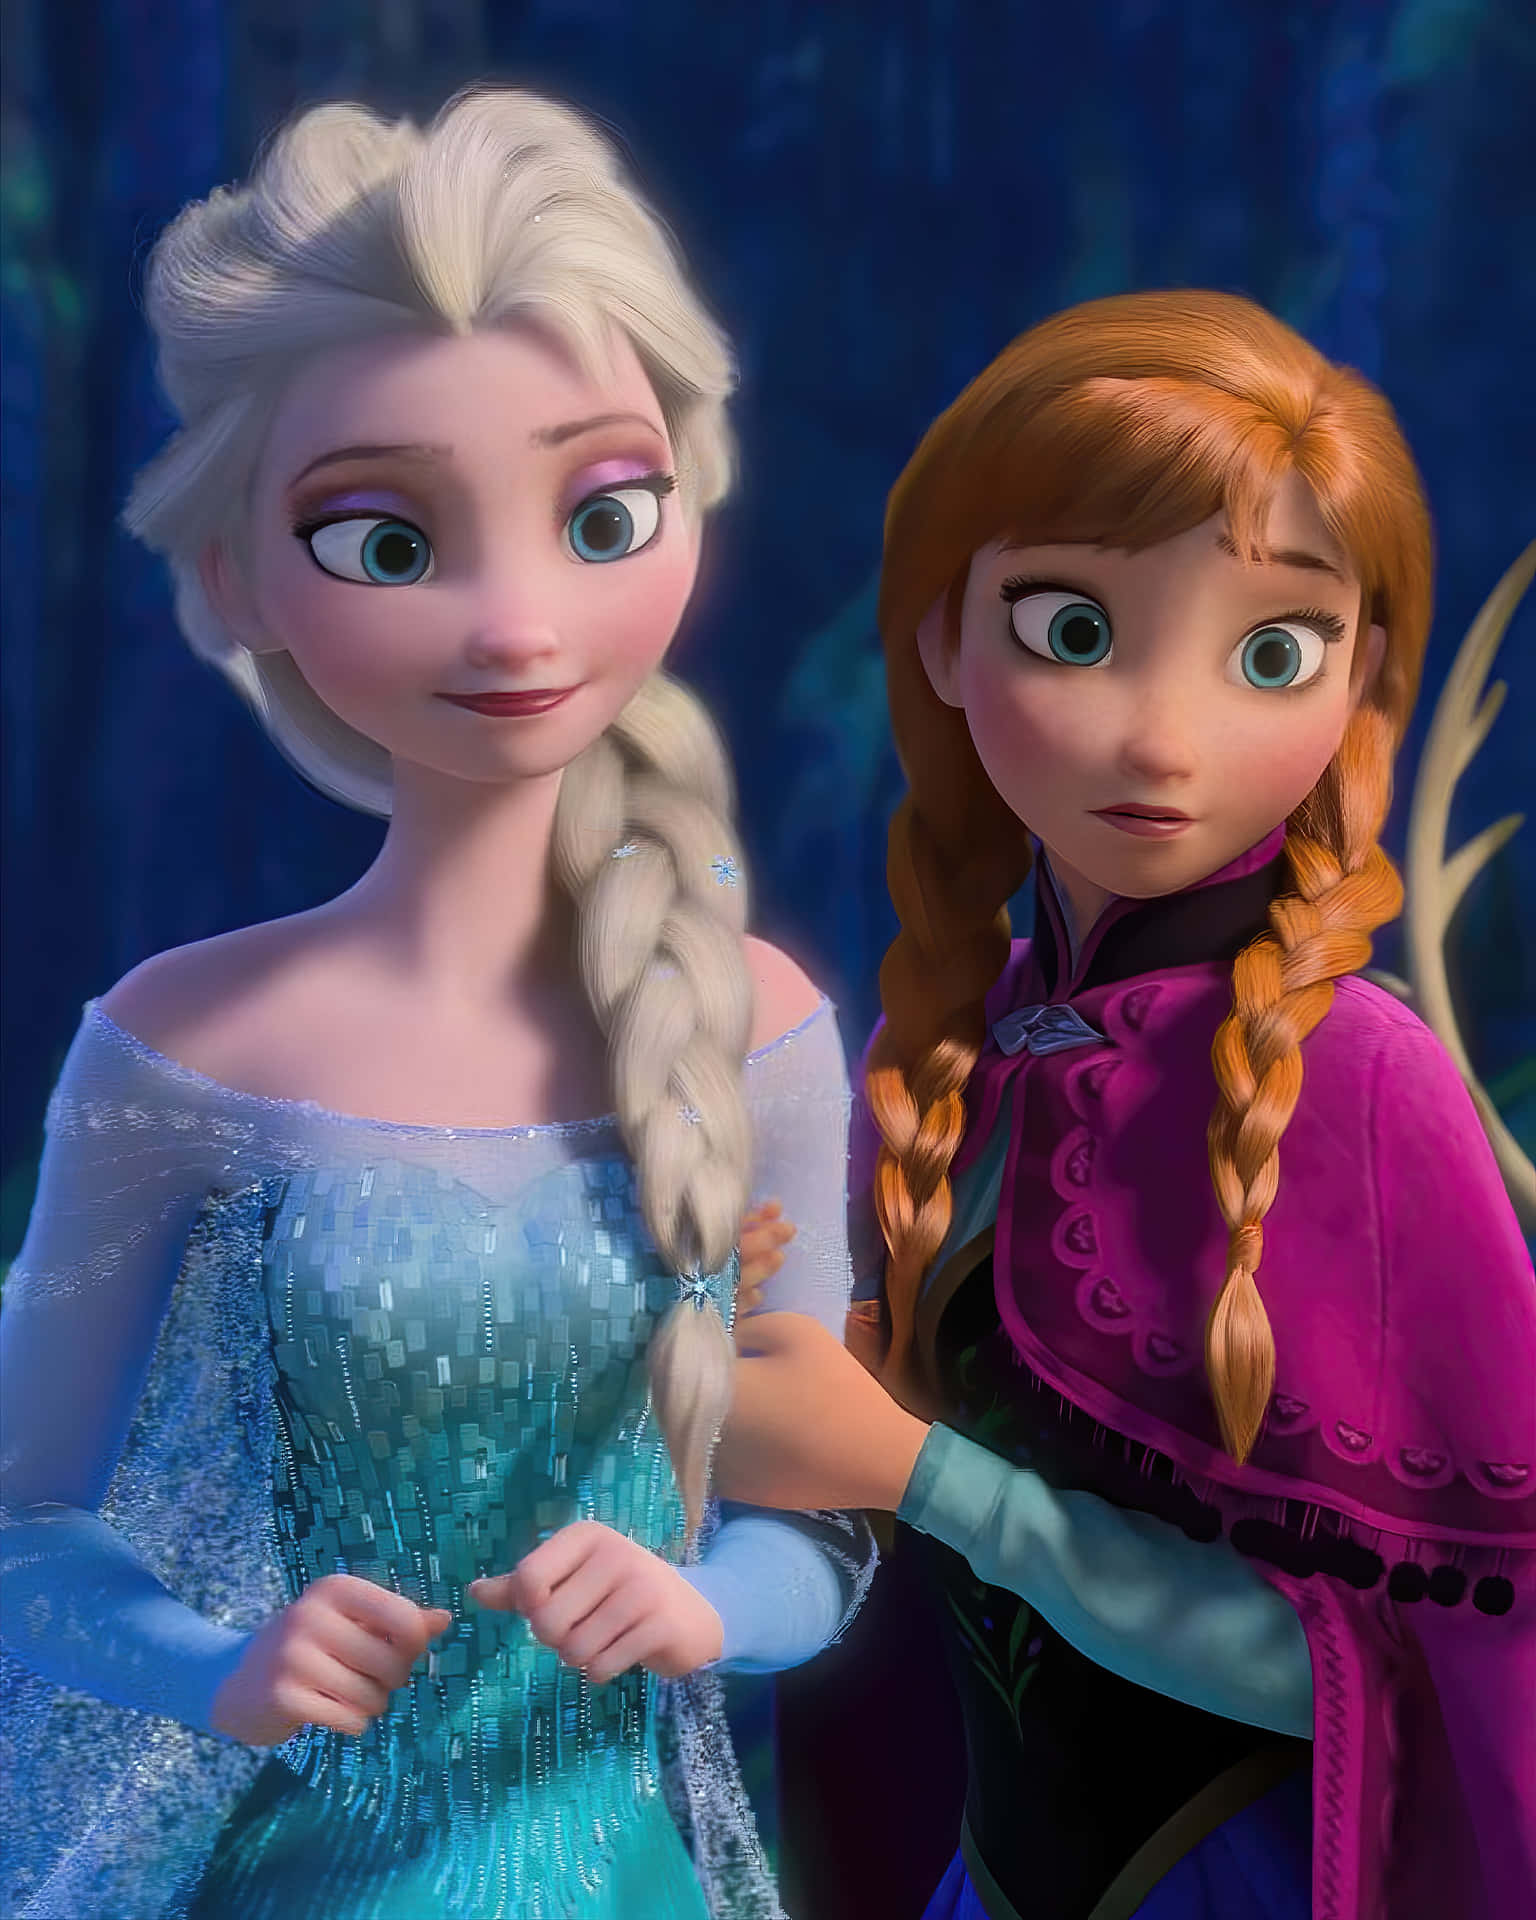 Get the new Elsa Phone to experience your favorite stories in a whole new way! Wallpaper